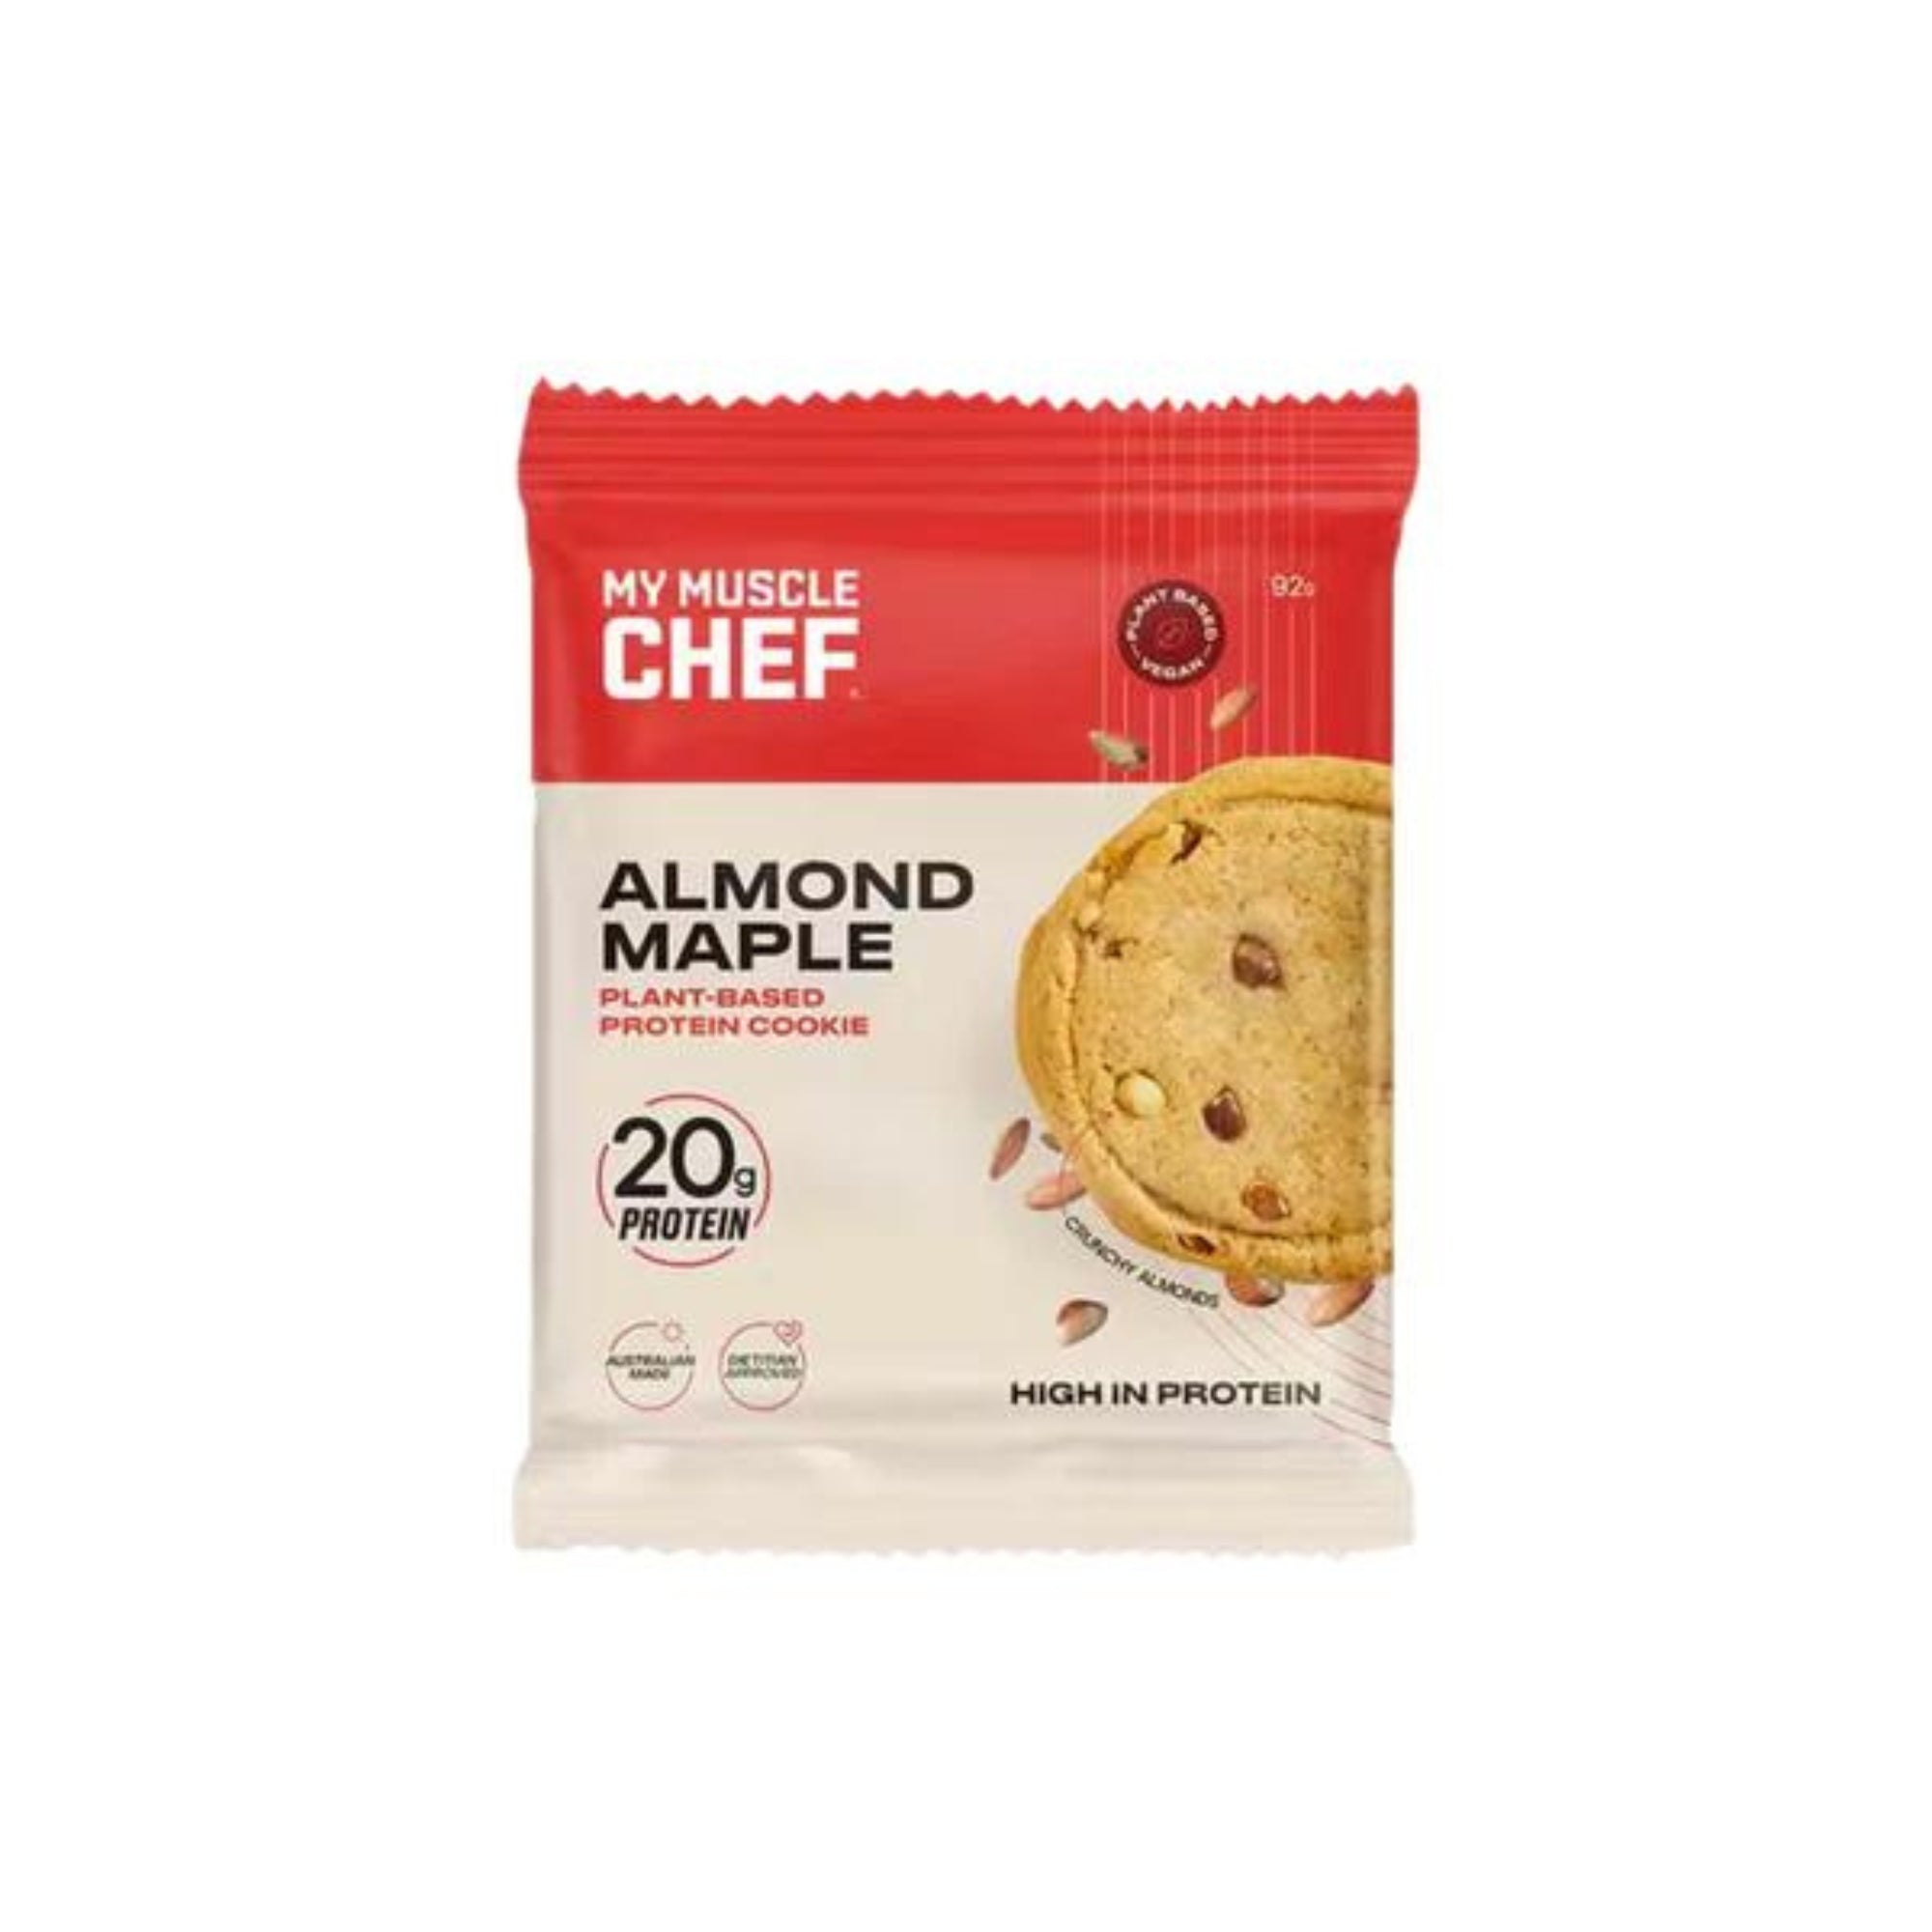 My Muscle Chef Vegan Cookie - Almond Maple